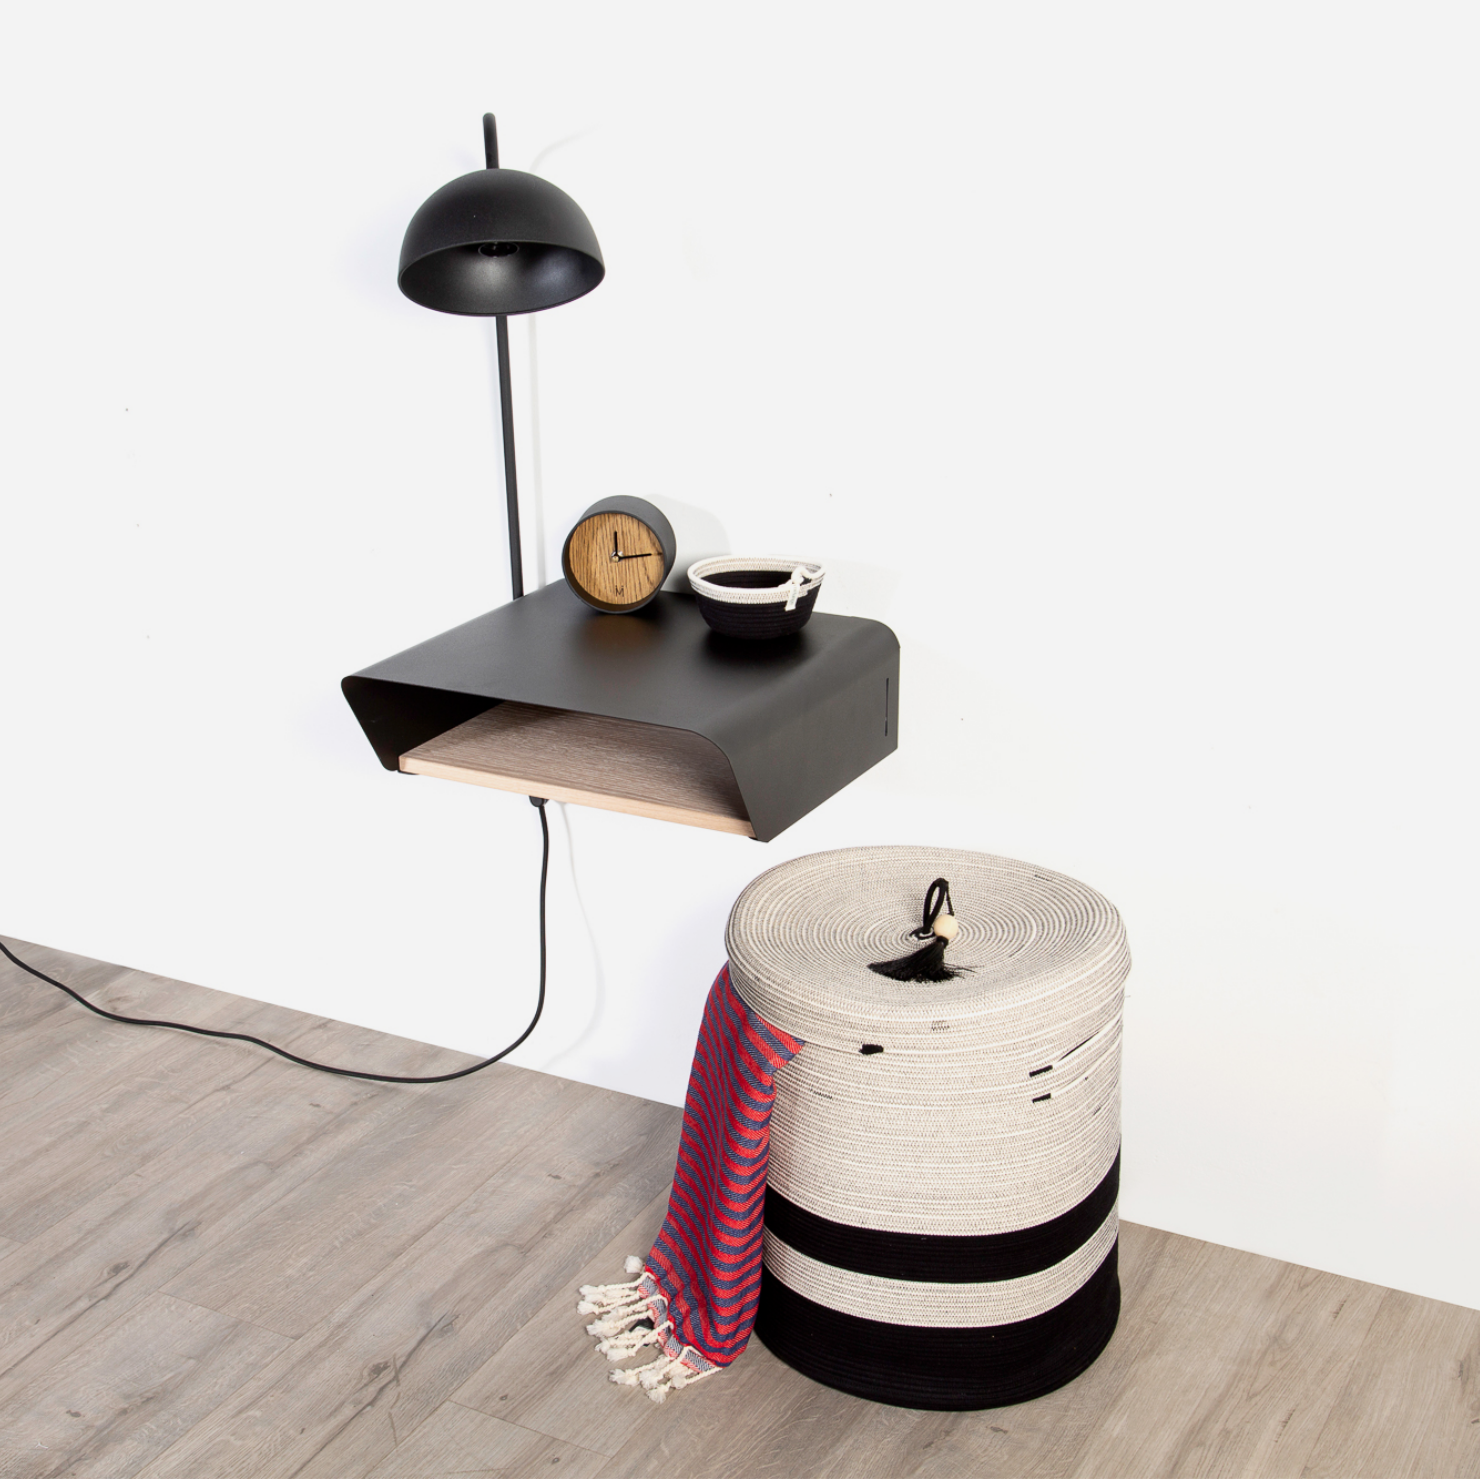 Stockholm Wall Mounted Bedside Table & Lamp